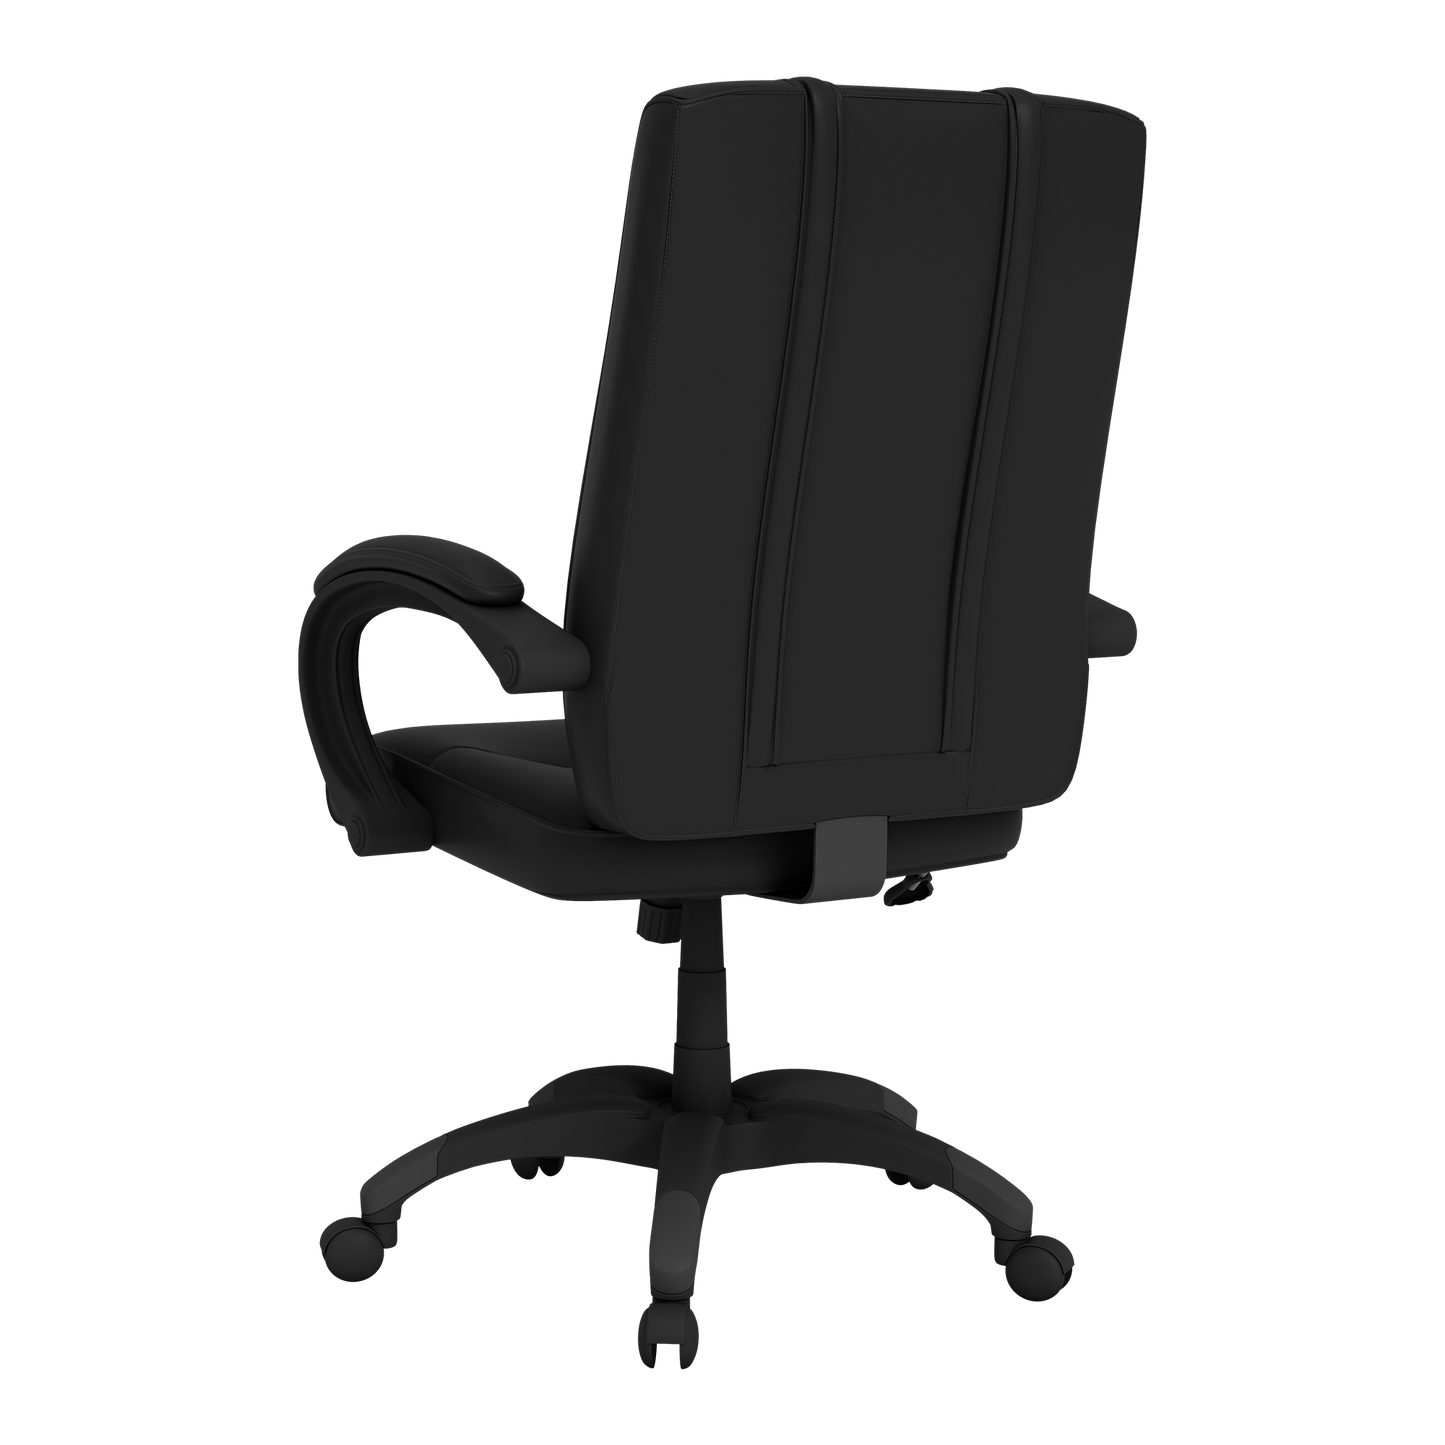 Office Chair 1000 with Chicago White Sox Cooperstown Secondary